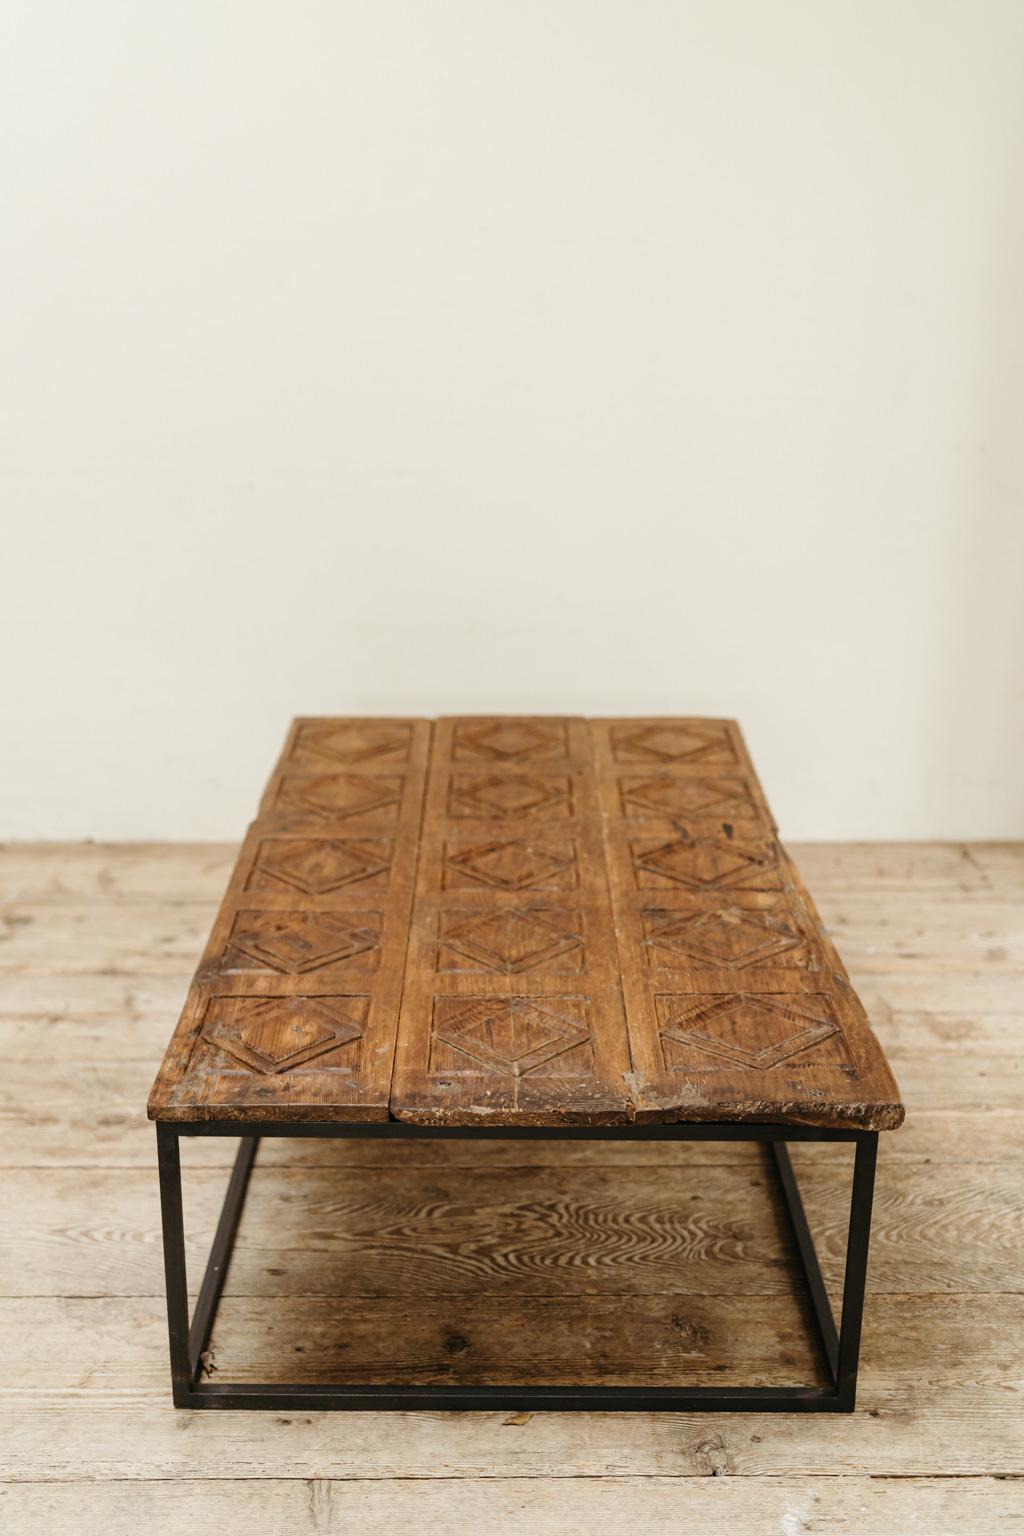 a 19th century wooden door from Aragon/Spain, now put on a contemporary iron base,
can be used as coffee table, beautiful worn patina, sturdy. 